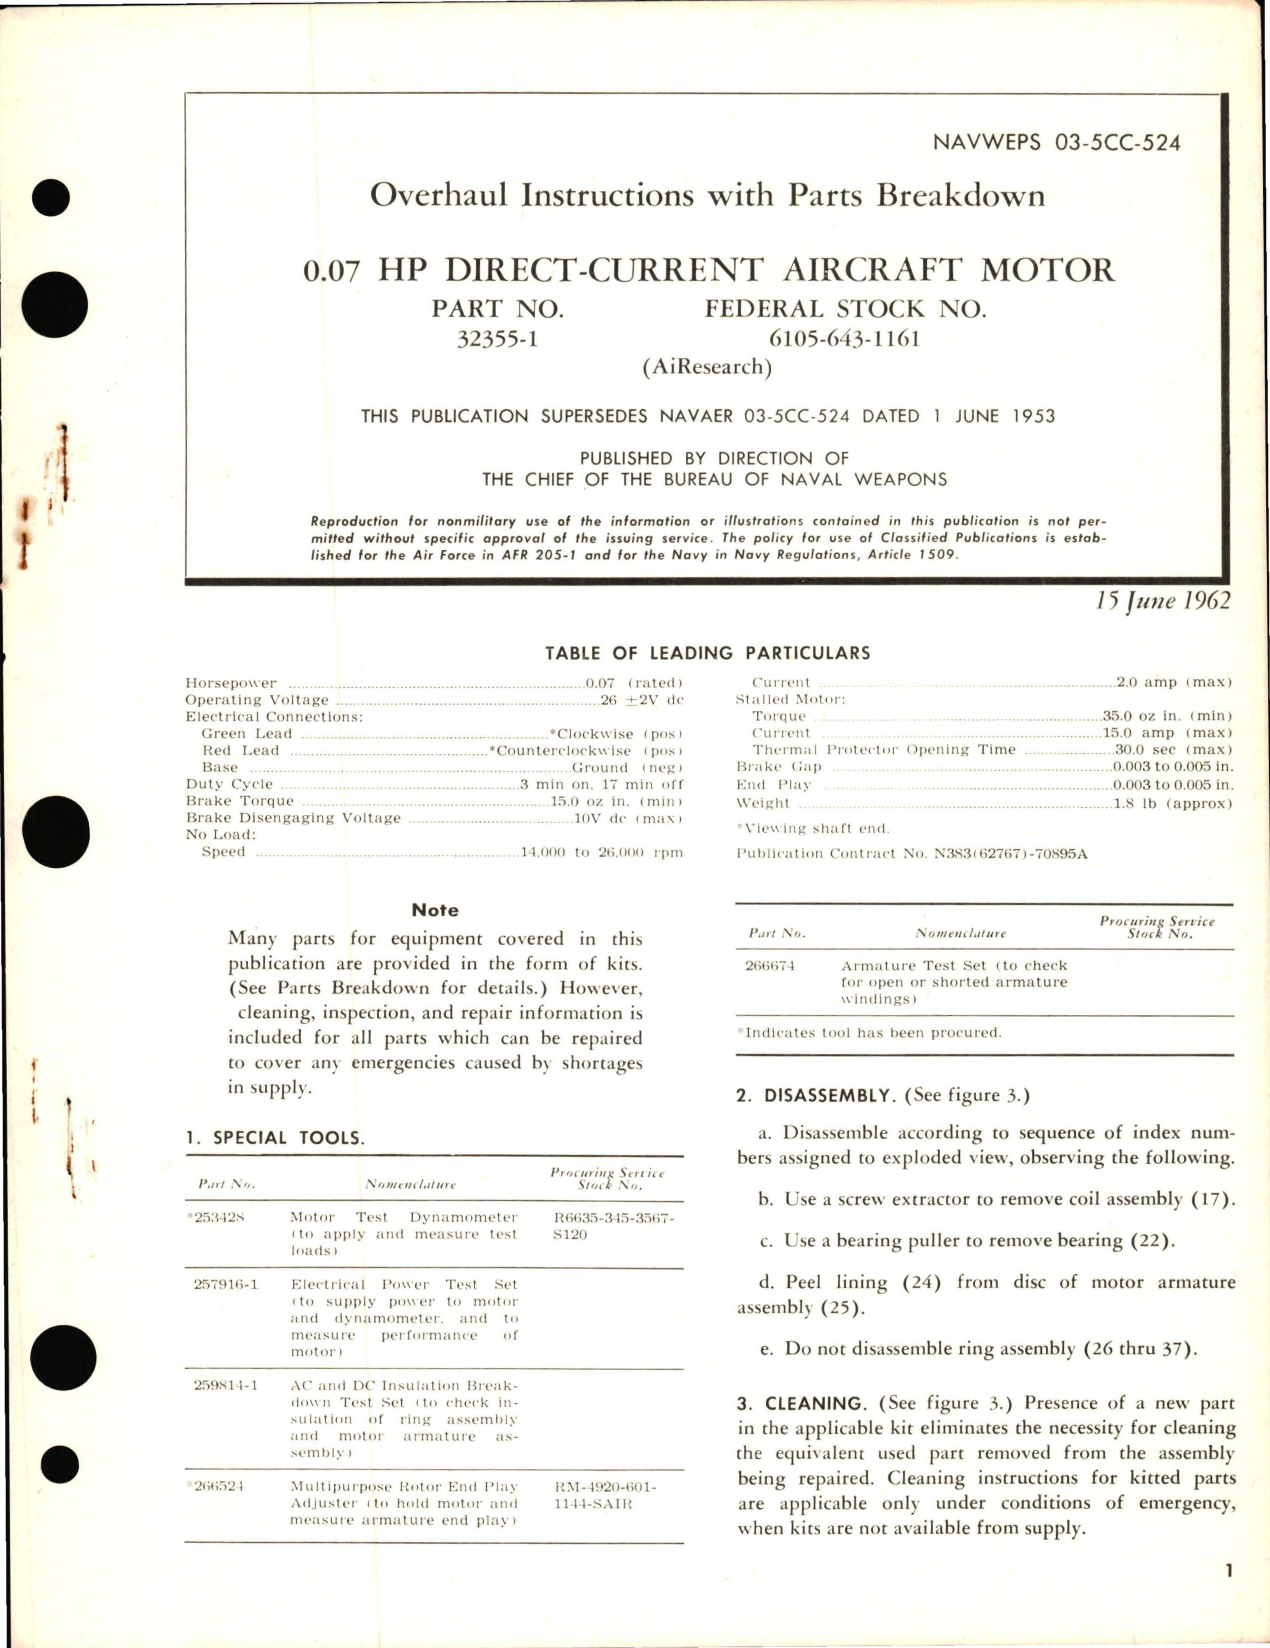 Sample page 1 from AirCorps Library document: Overhaul Instructions with Parts Breakdown for HP Direct Current Aircraft Motor 0.07 - Part 32355-1